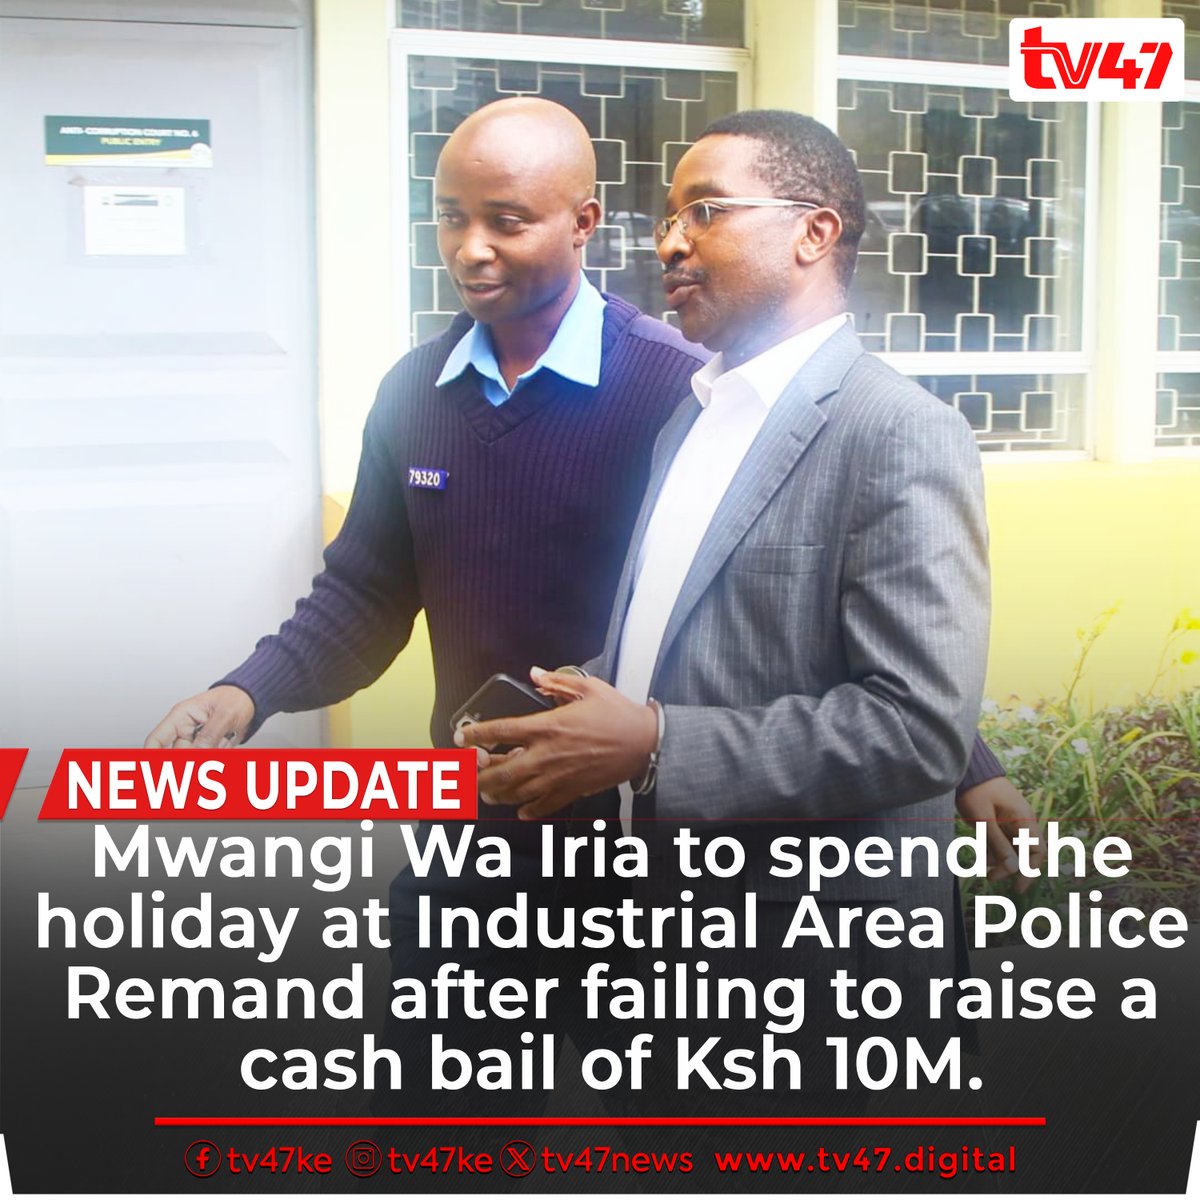 Mwangi Wa Iria to spend the holiday at Industrial Area Police Remand after failing to raise a cash bail of Ksh 10M. #tv47digital